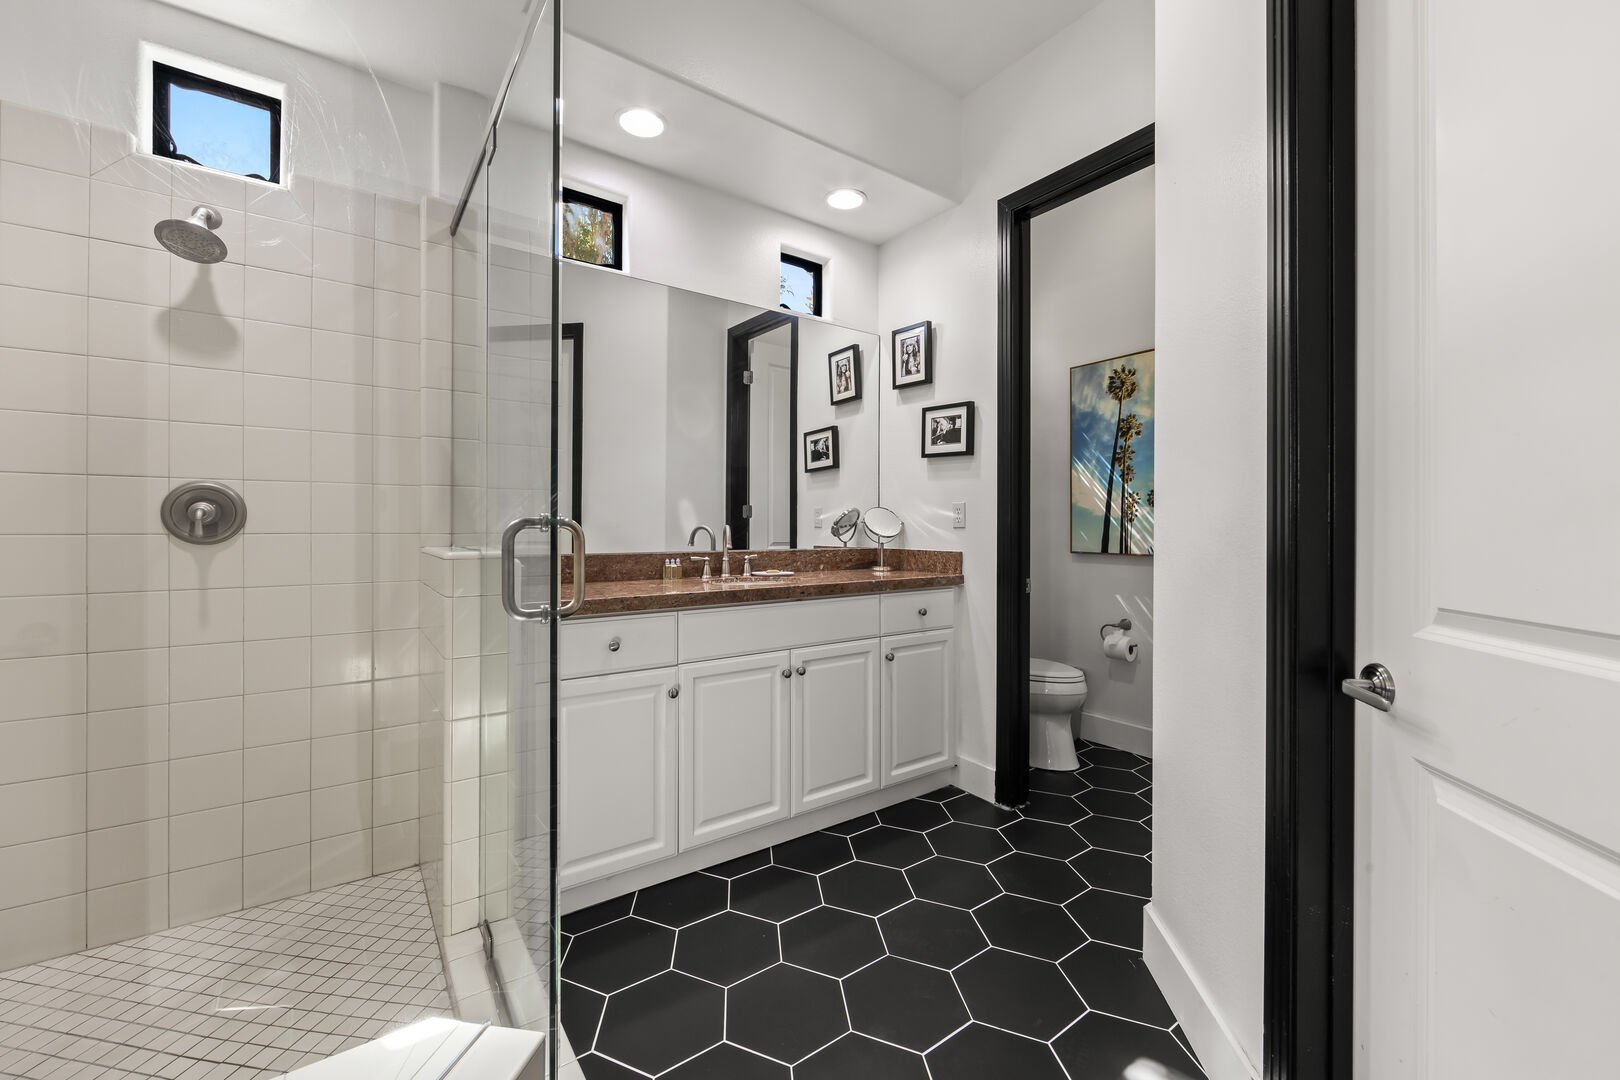 The private en Suite bathroom features a tile shower and granite countertop.